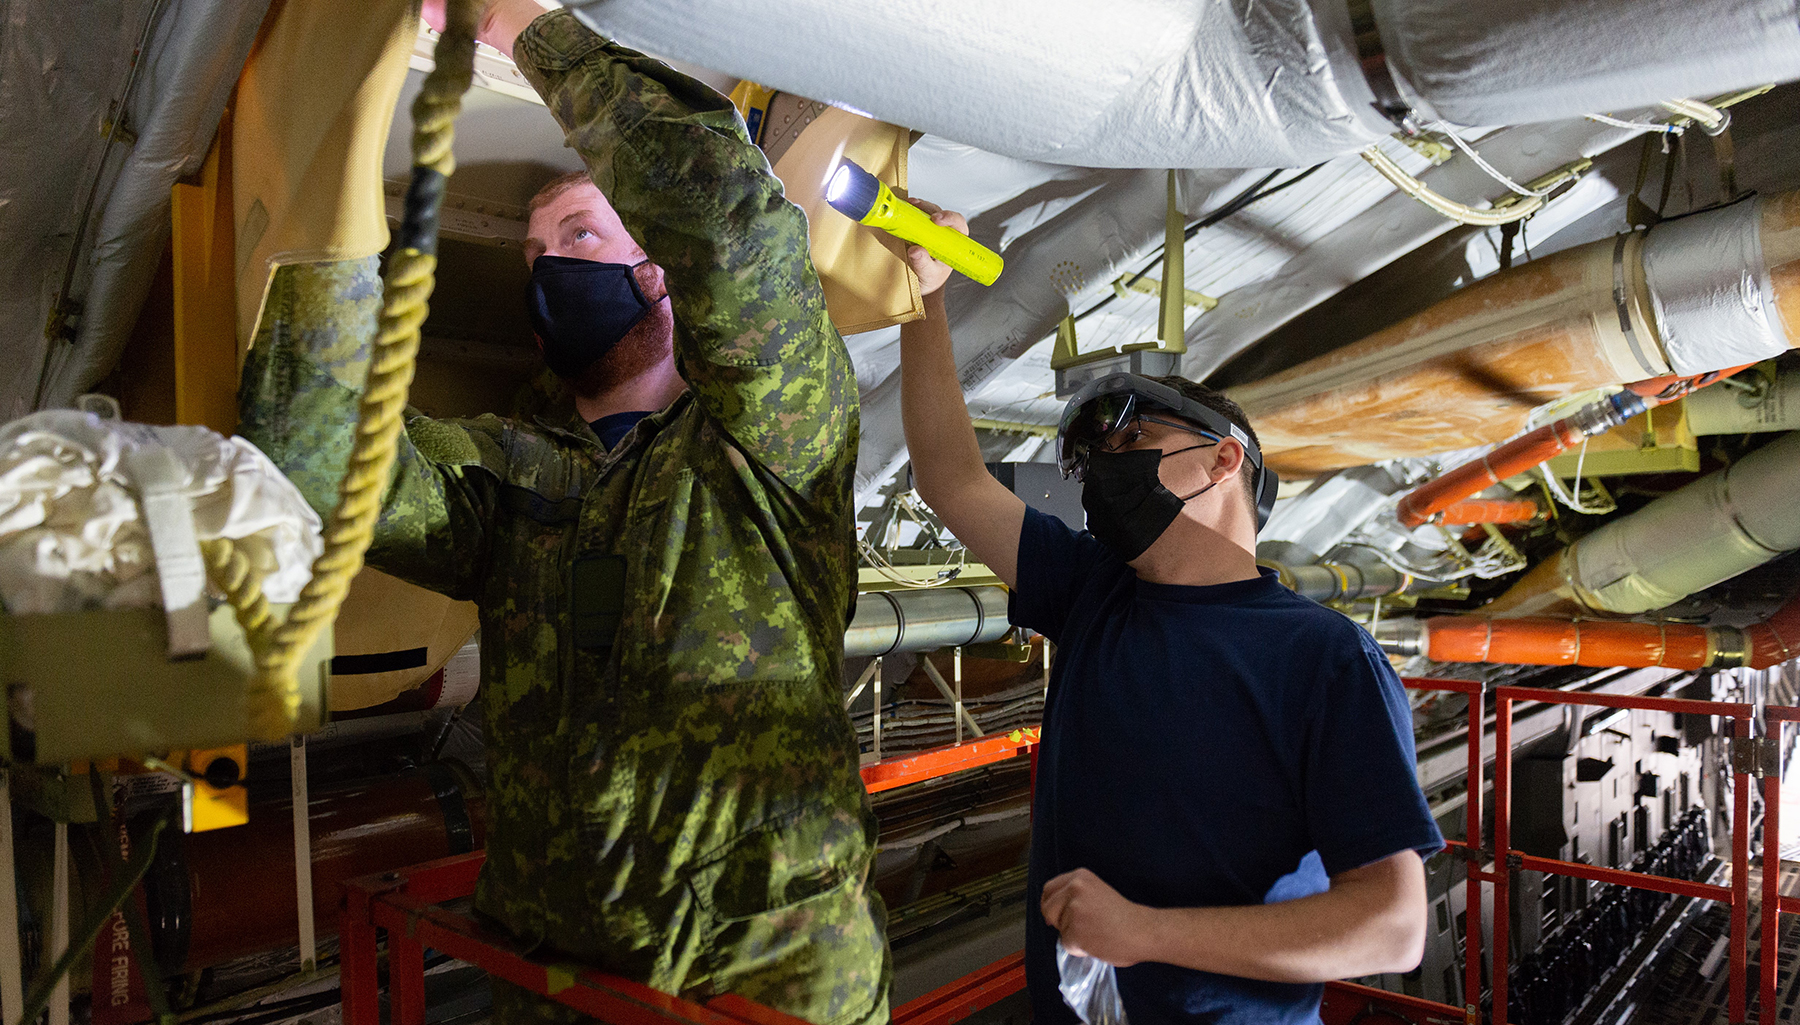 Two men with masks, one wearing an olive-green camouflage uniform and the other a blue shirt, work inside an aircraft. 